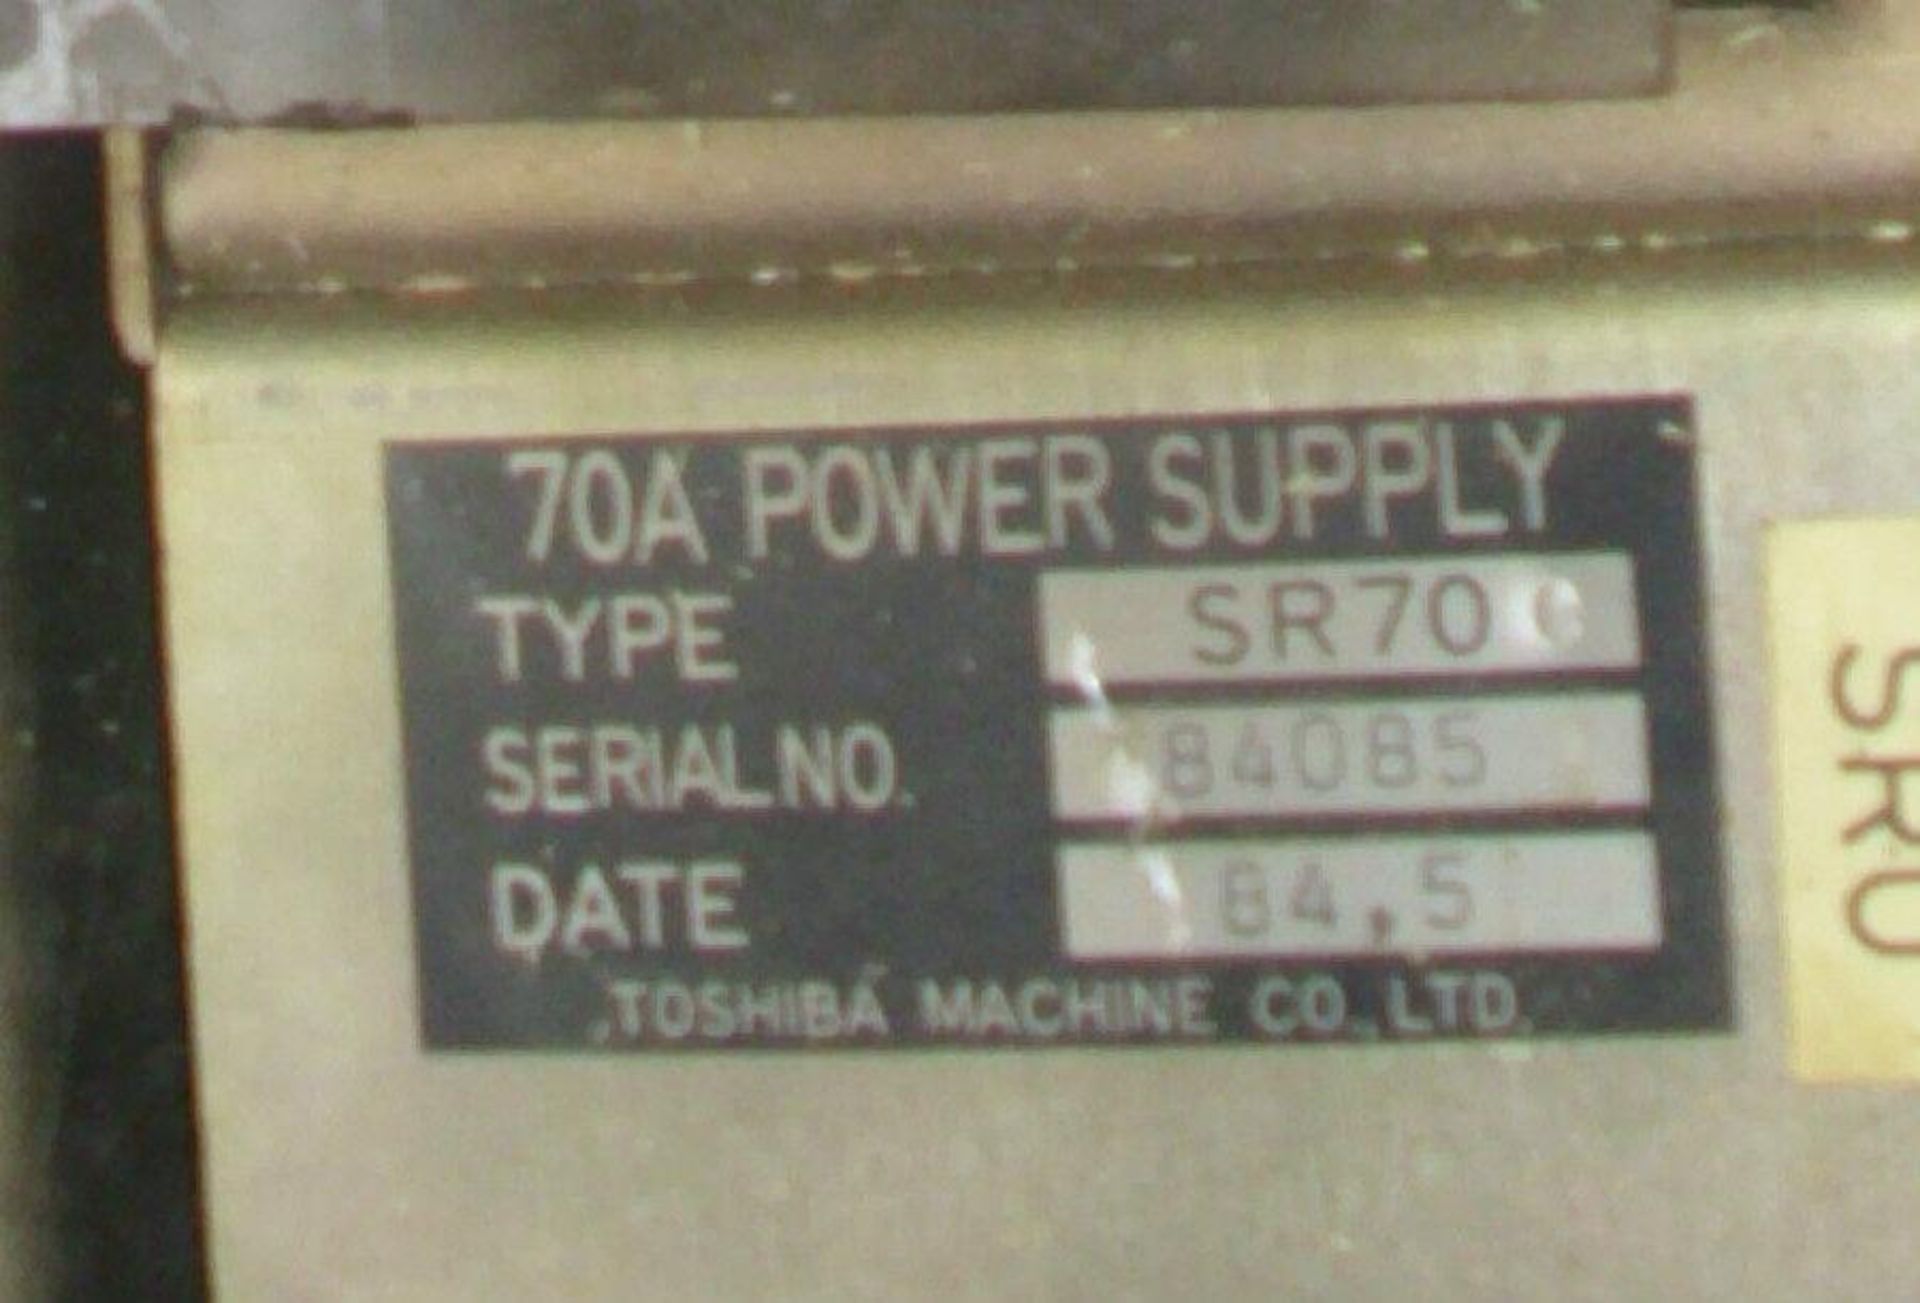 Toshiba / Tosnuc 70A Power Supply SR700 - Image 6 of 6